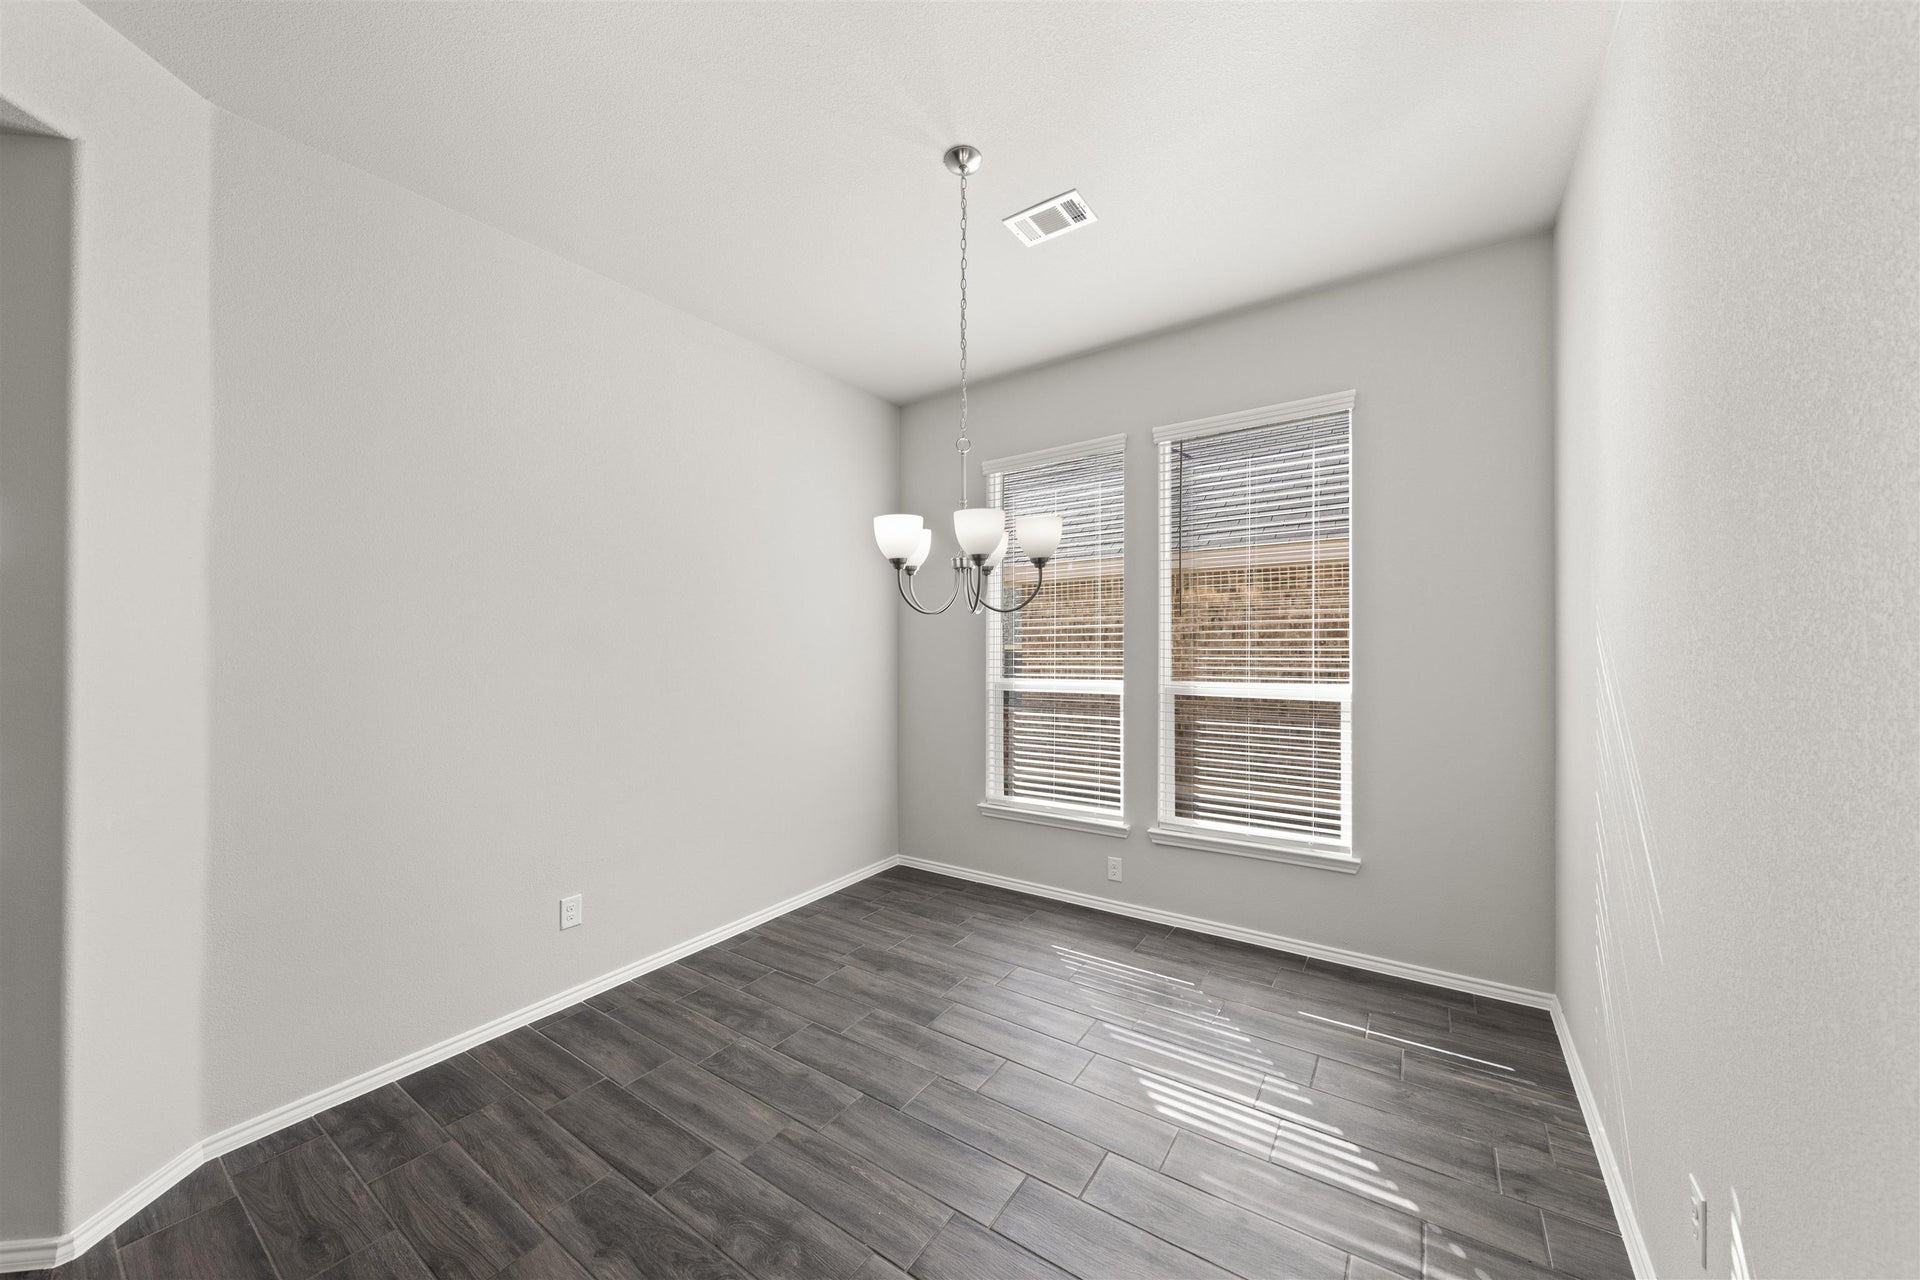 3br New Home in Fort Worth, TX